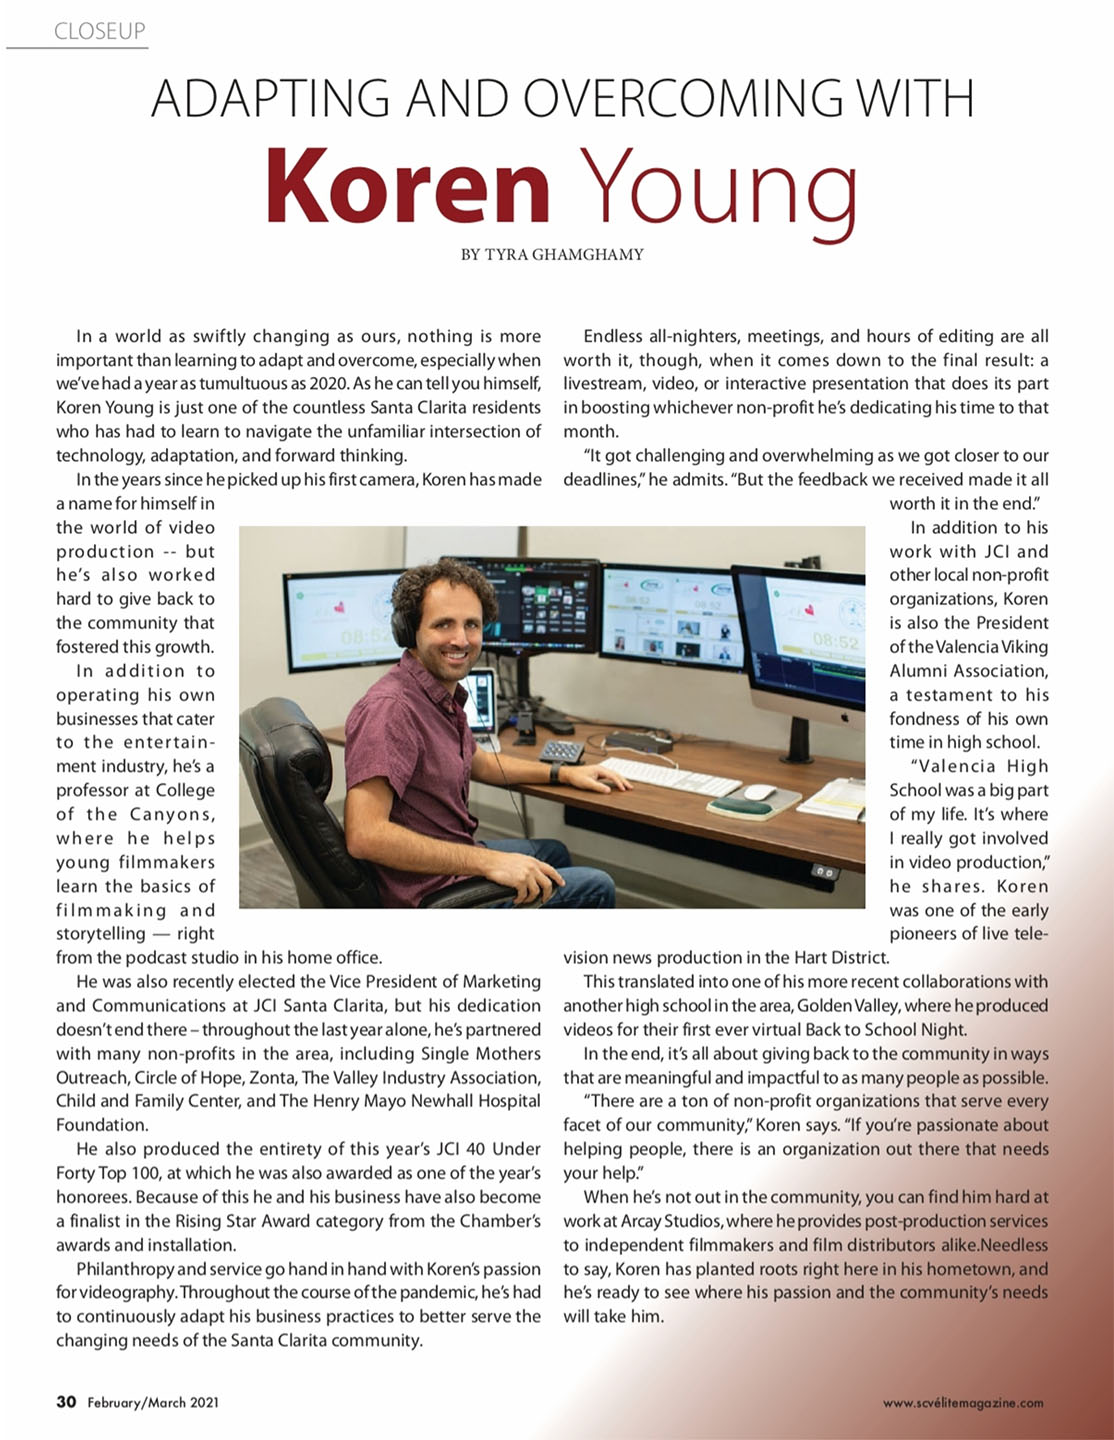 Adapting and Overcoming with Koren Young